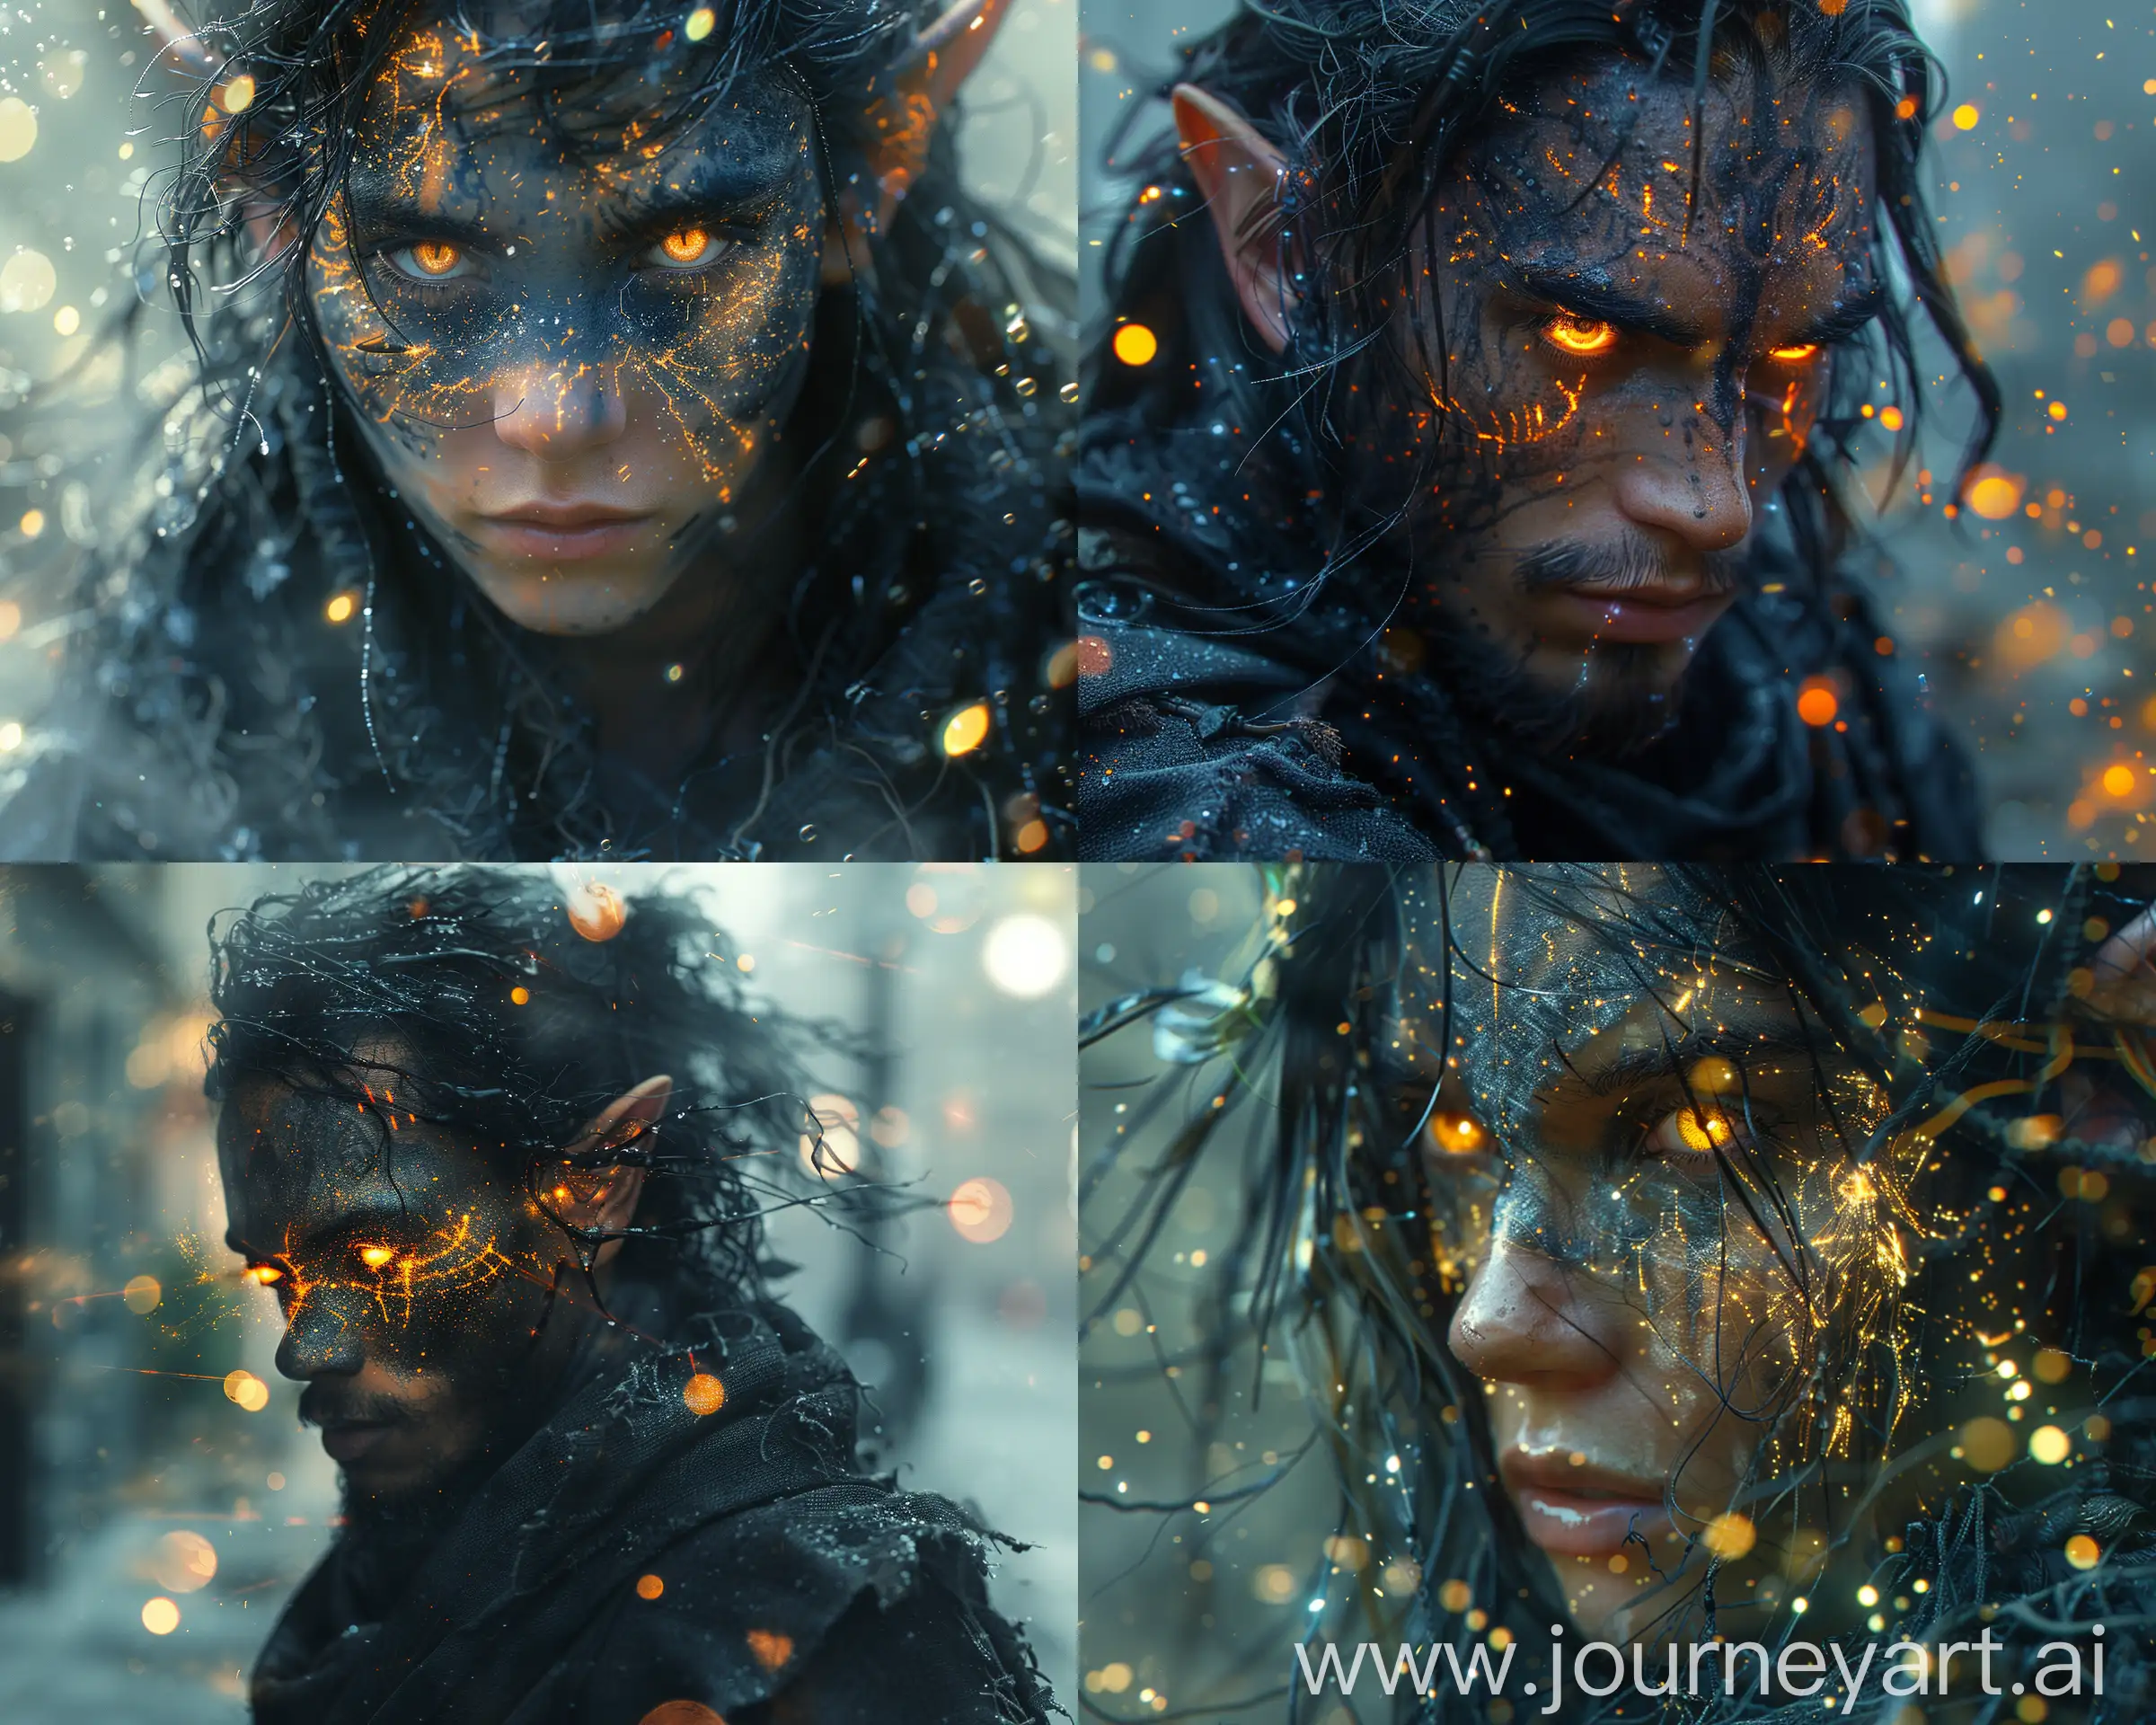 Epic-Fantasy-Art-Wild-Cyborg-Elf-Android-with-Glowing-Runic-Face-Paint